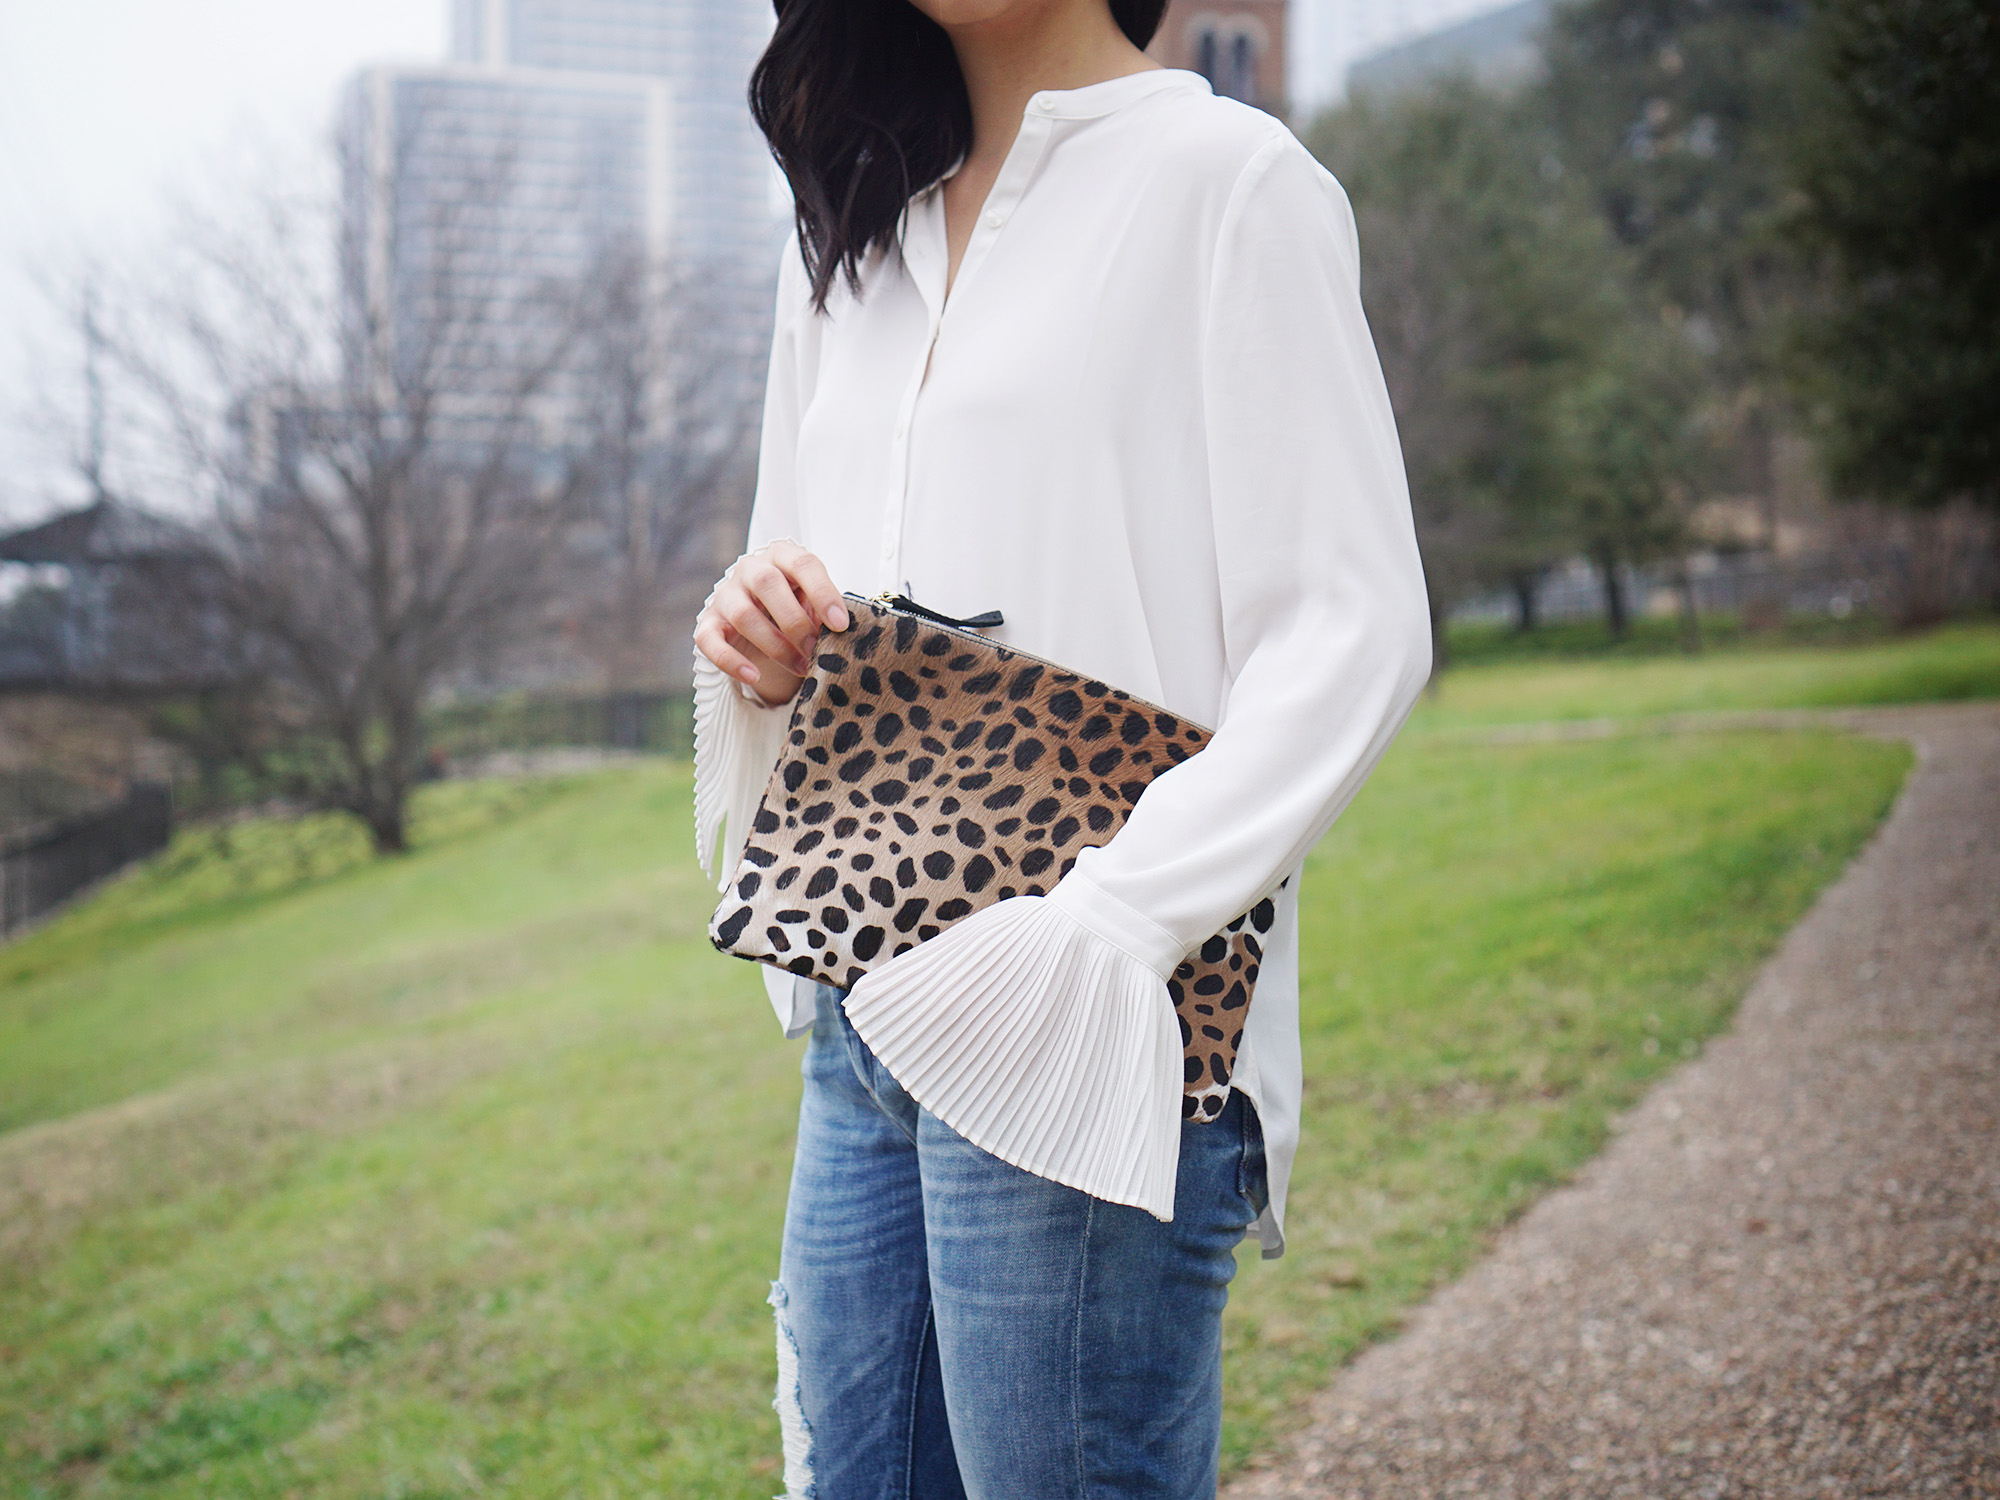 Skirt The Rules / Blouse with Bellsleeves